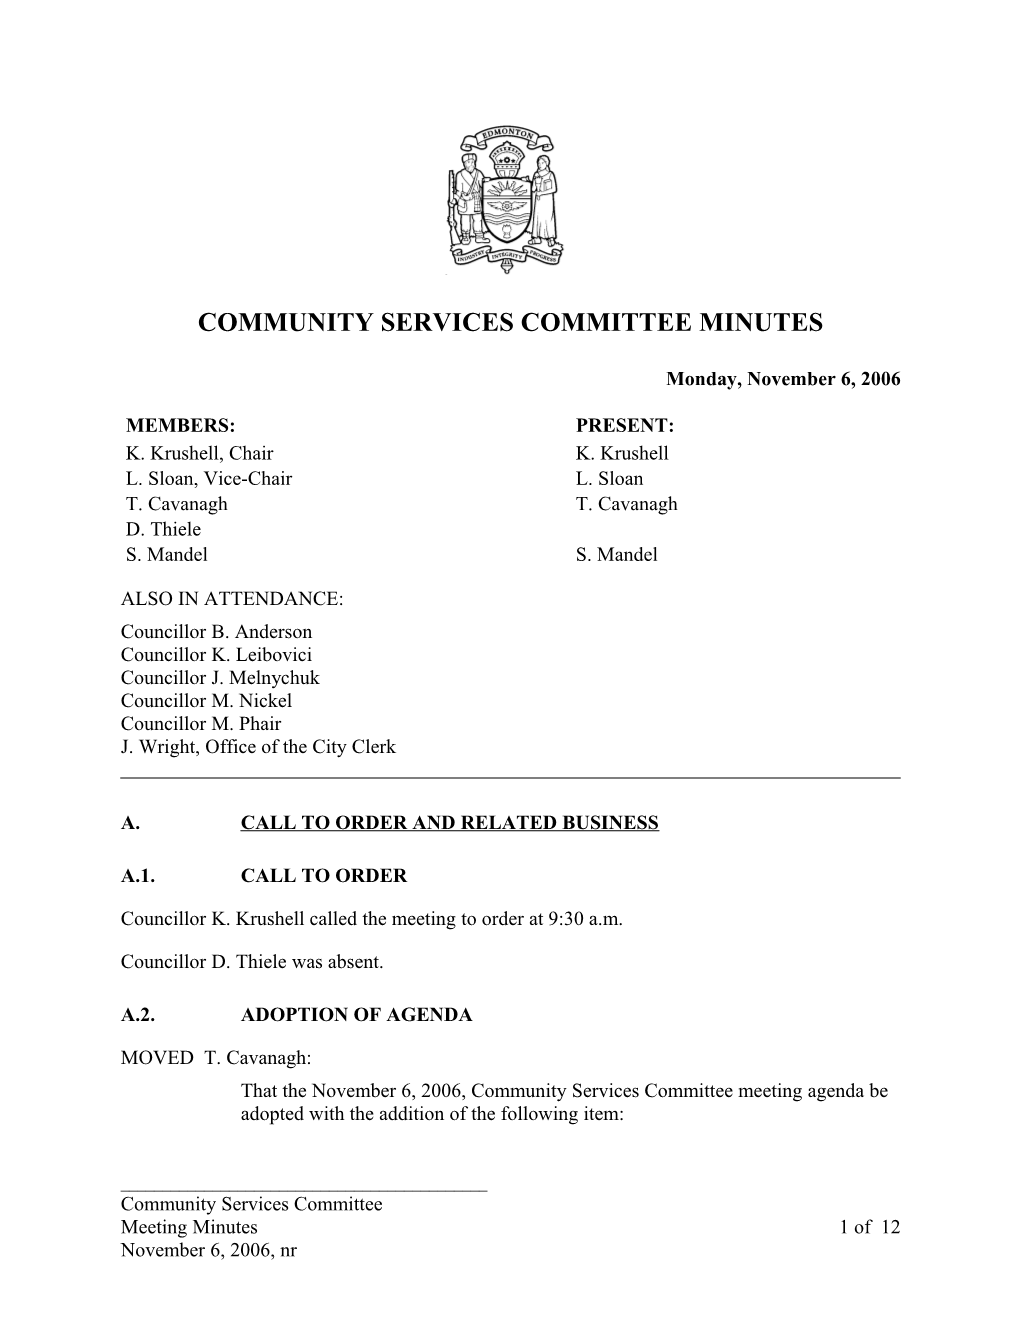 Minutes for Community Services Committee November 6, 2006 Meeting